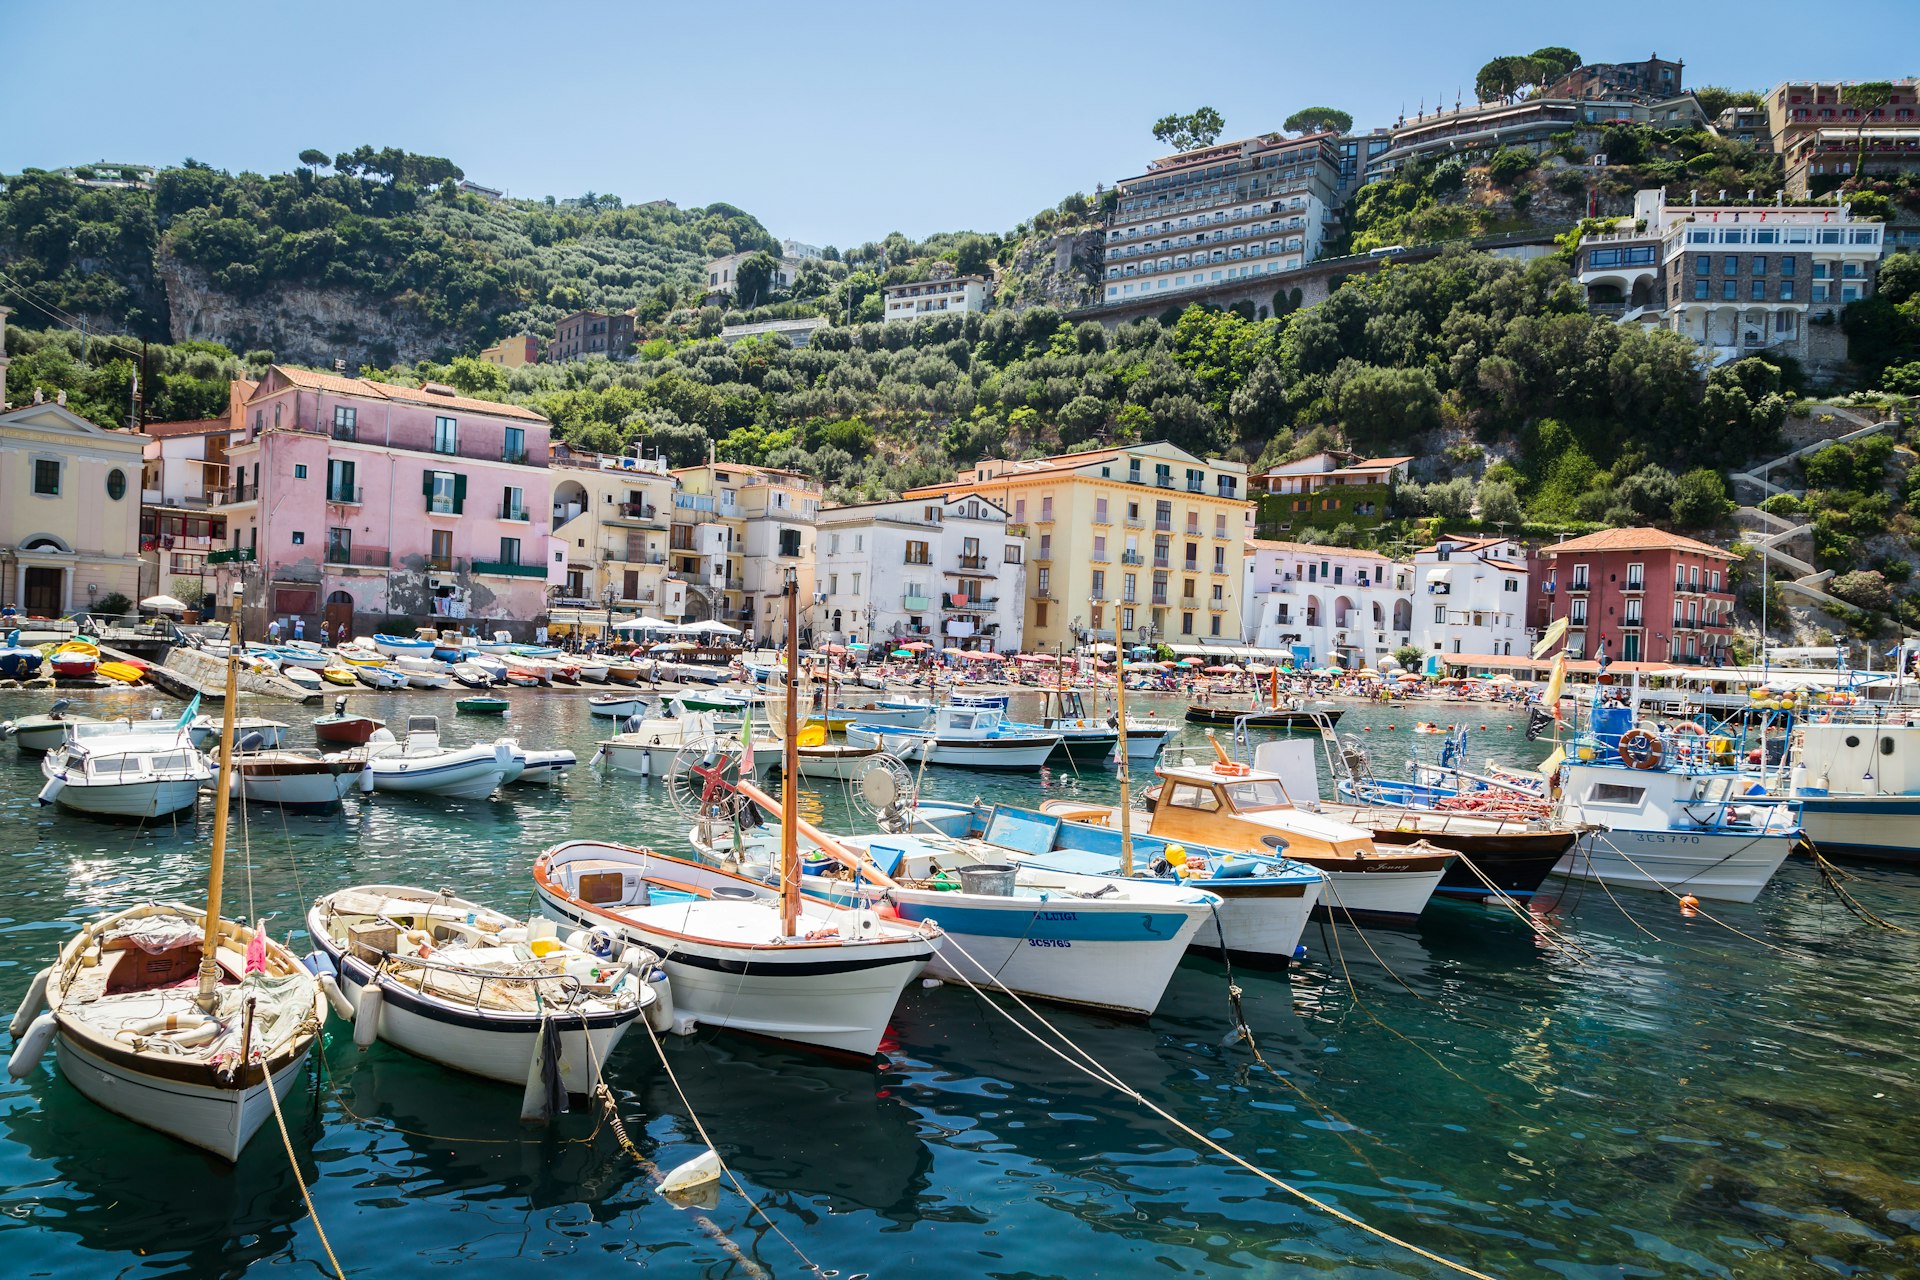 Colorful boats in the port of Sorrento